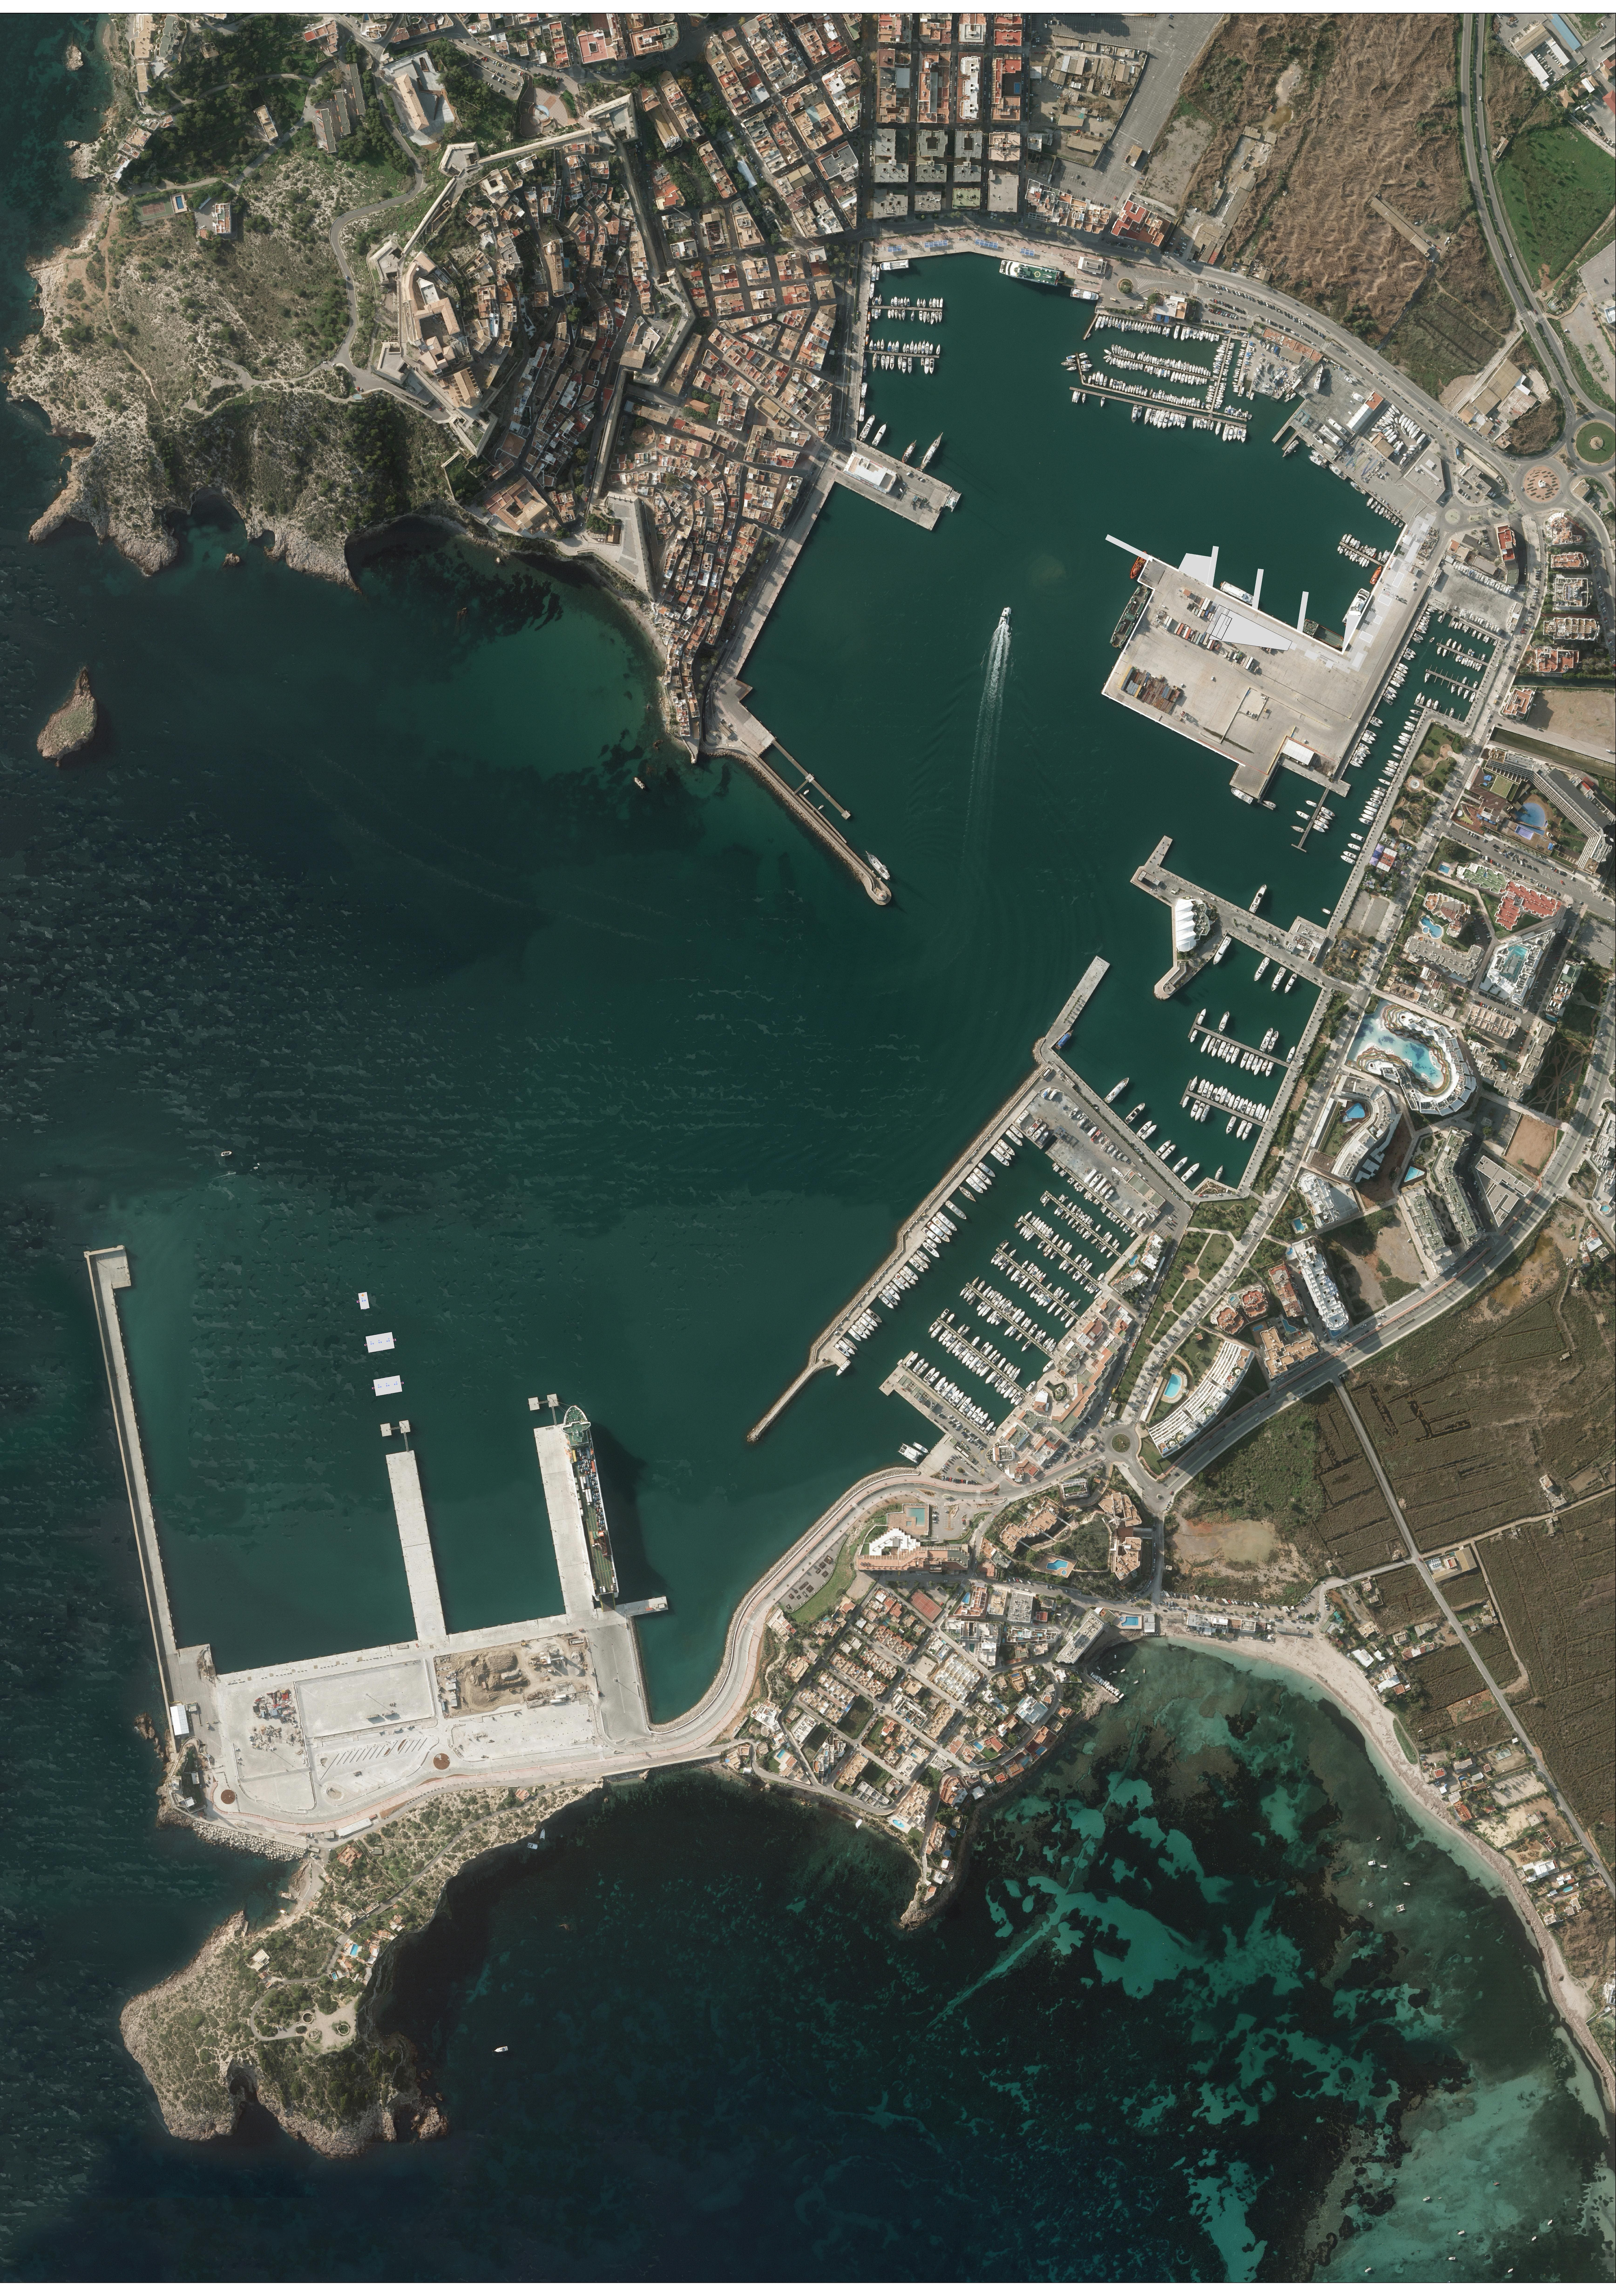 The APB starts the strategic environmental study for the Special Plan for the Port of Eivissa